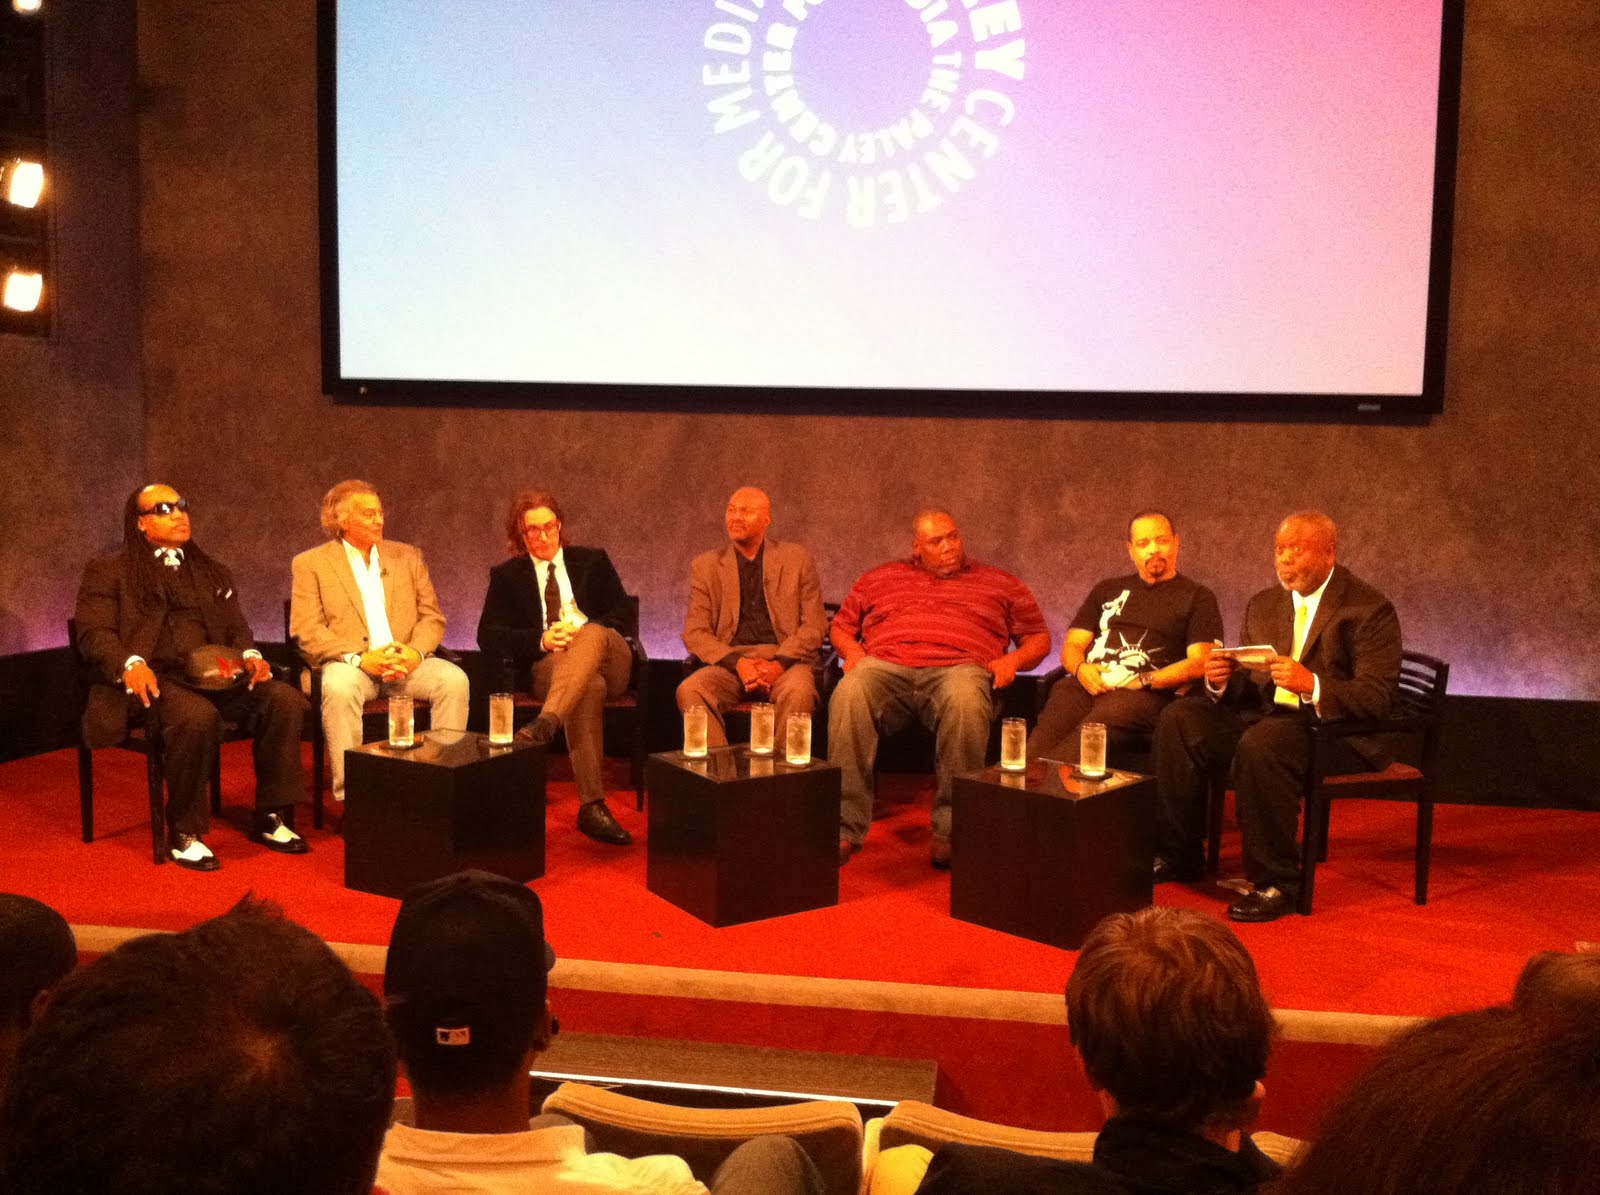 Panel discussion of Planet Rock at Paley Center For Media, 2010. L to R: Grandmaster Flash, Torgoff, Richard Lowe, Nelson George, Azie Faison, Ice-T, Barry Michael Cooper. 